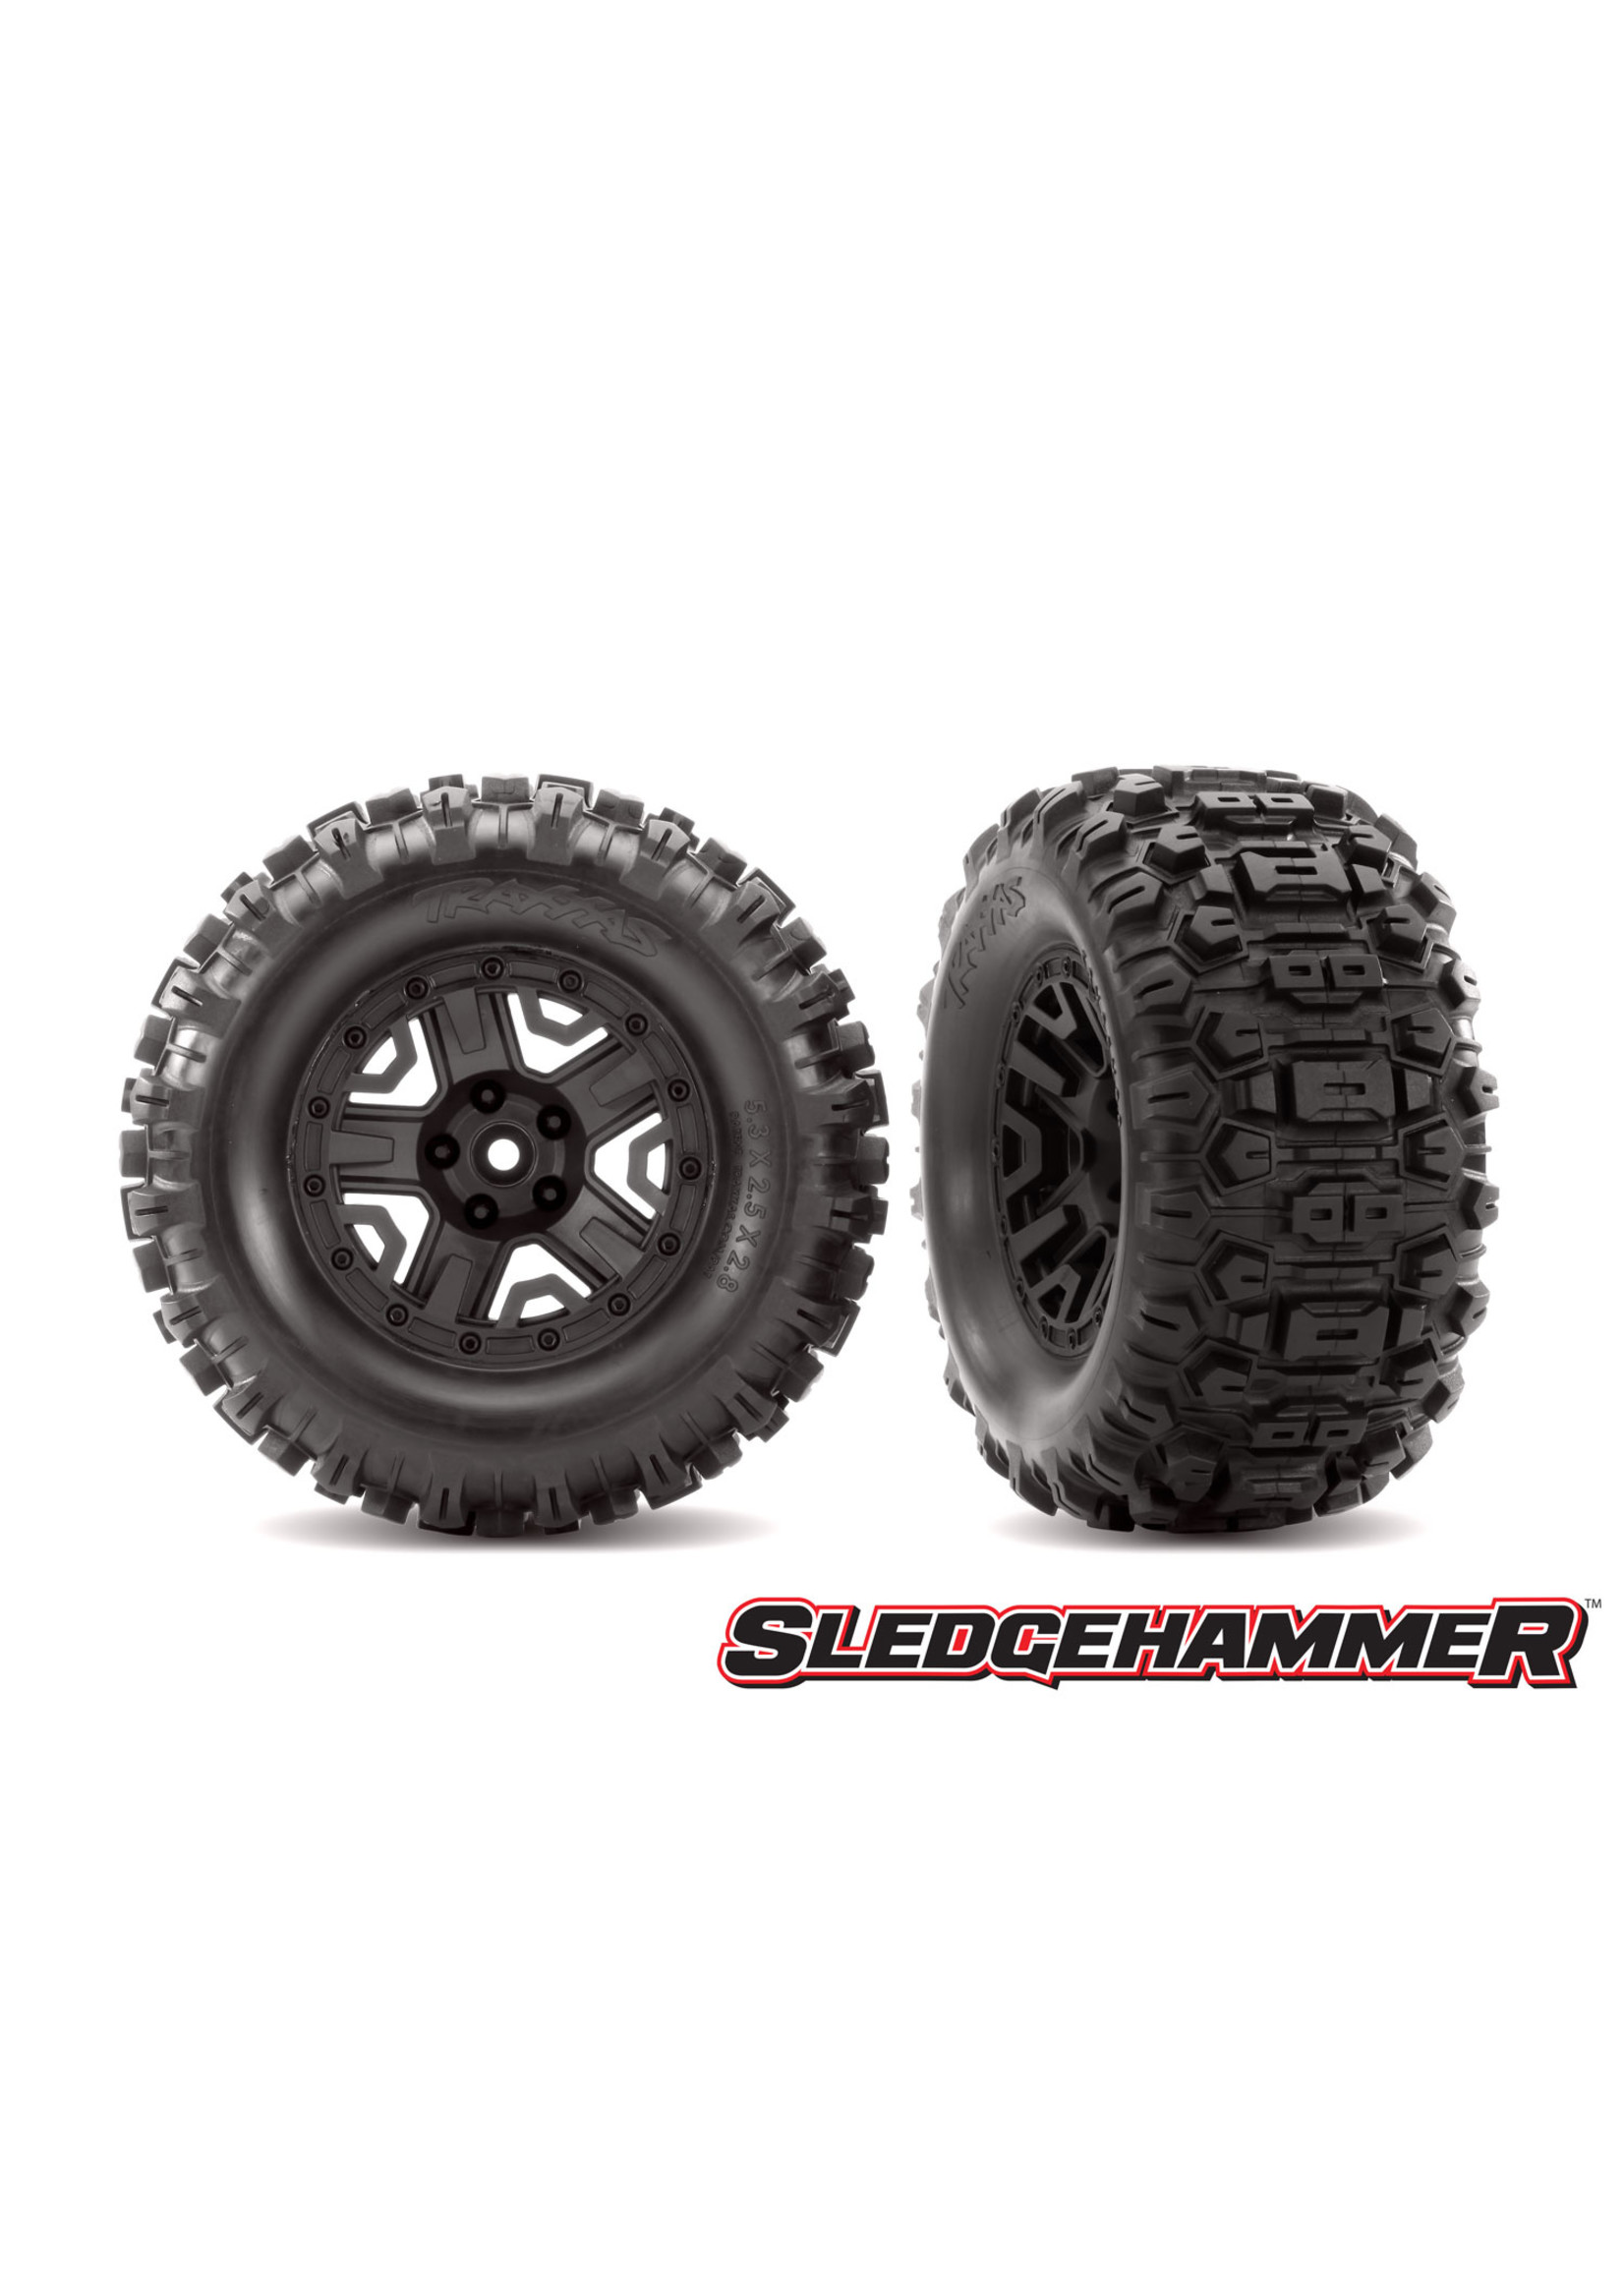 Traxxas TRA6792 Traxxas Tires & wheels, assembled, glued (black 2.8' wheels, Sledgehammer tires, foam inserts) (4WD electric front/rear, 2WD electric front only) (2) (TSM rated)